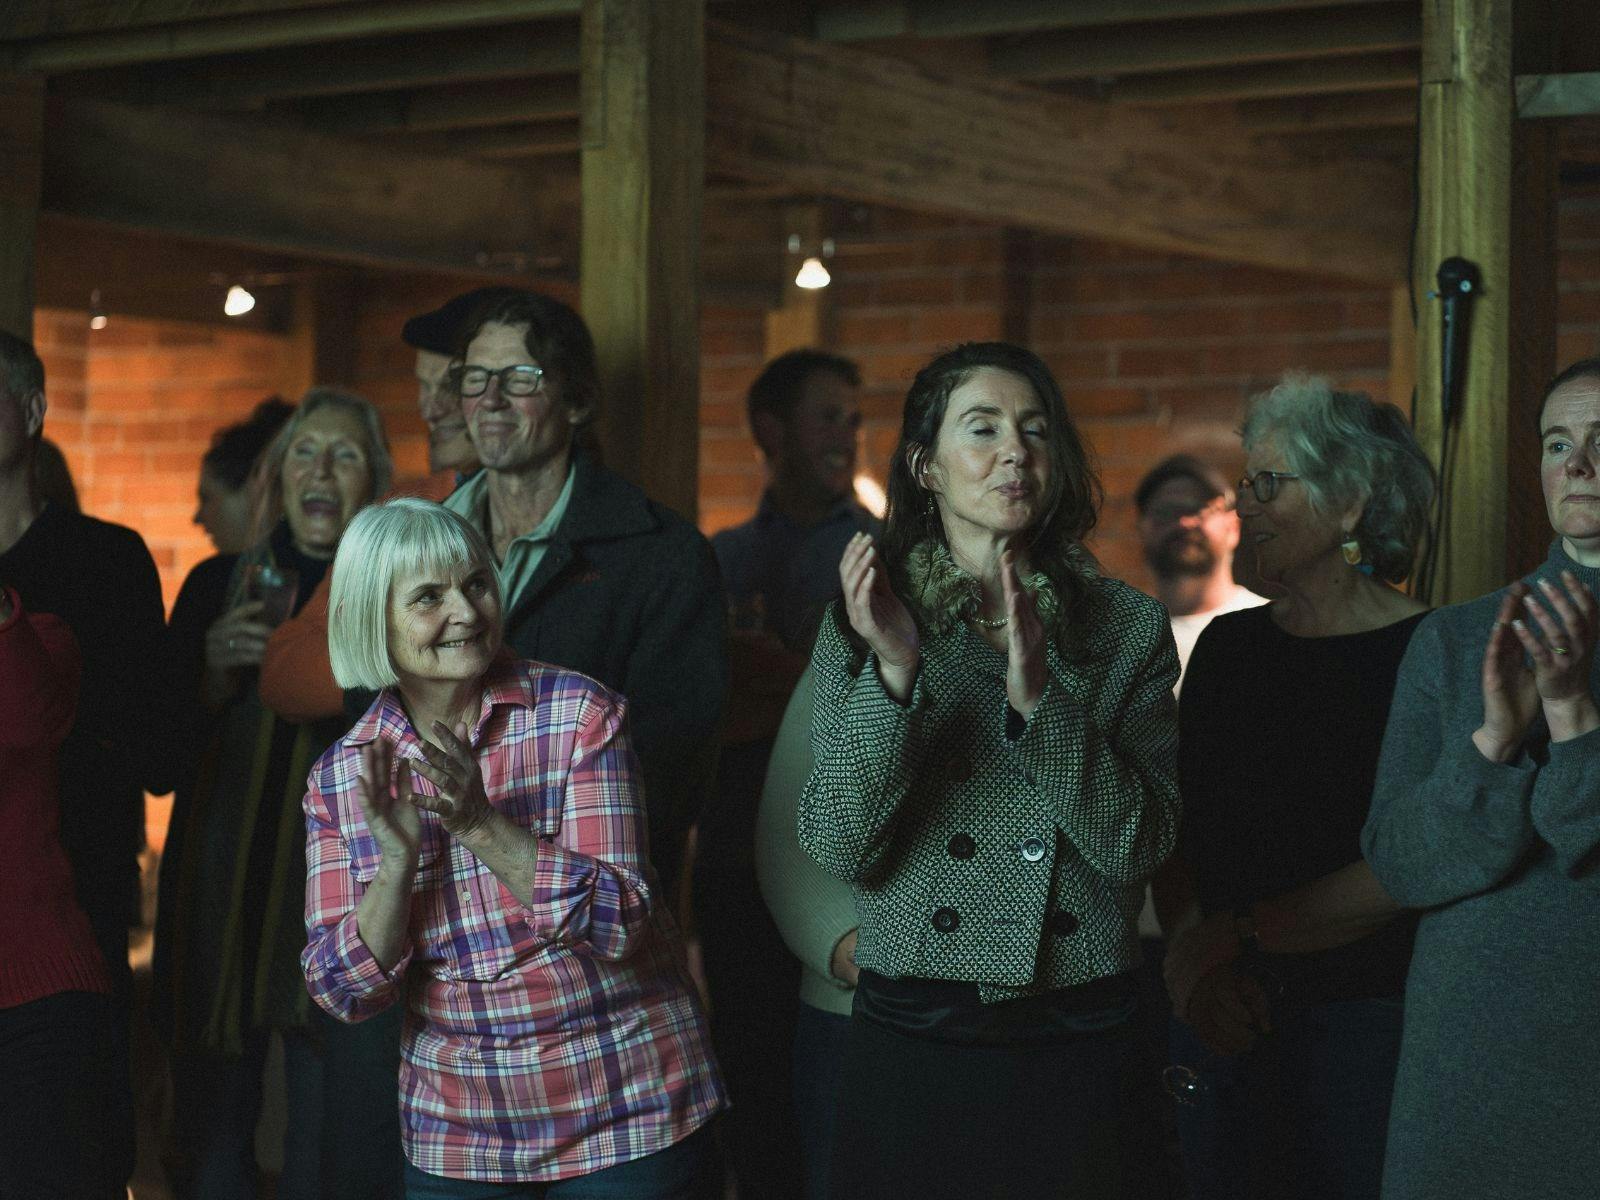 Several people at Shed Choir in The Don clapping and laughing during a song break.